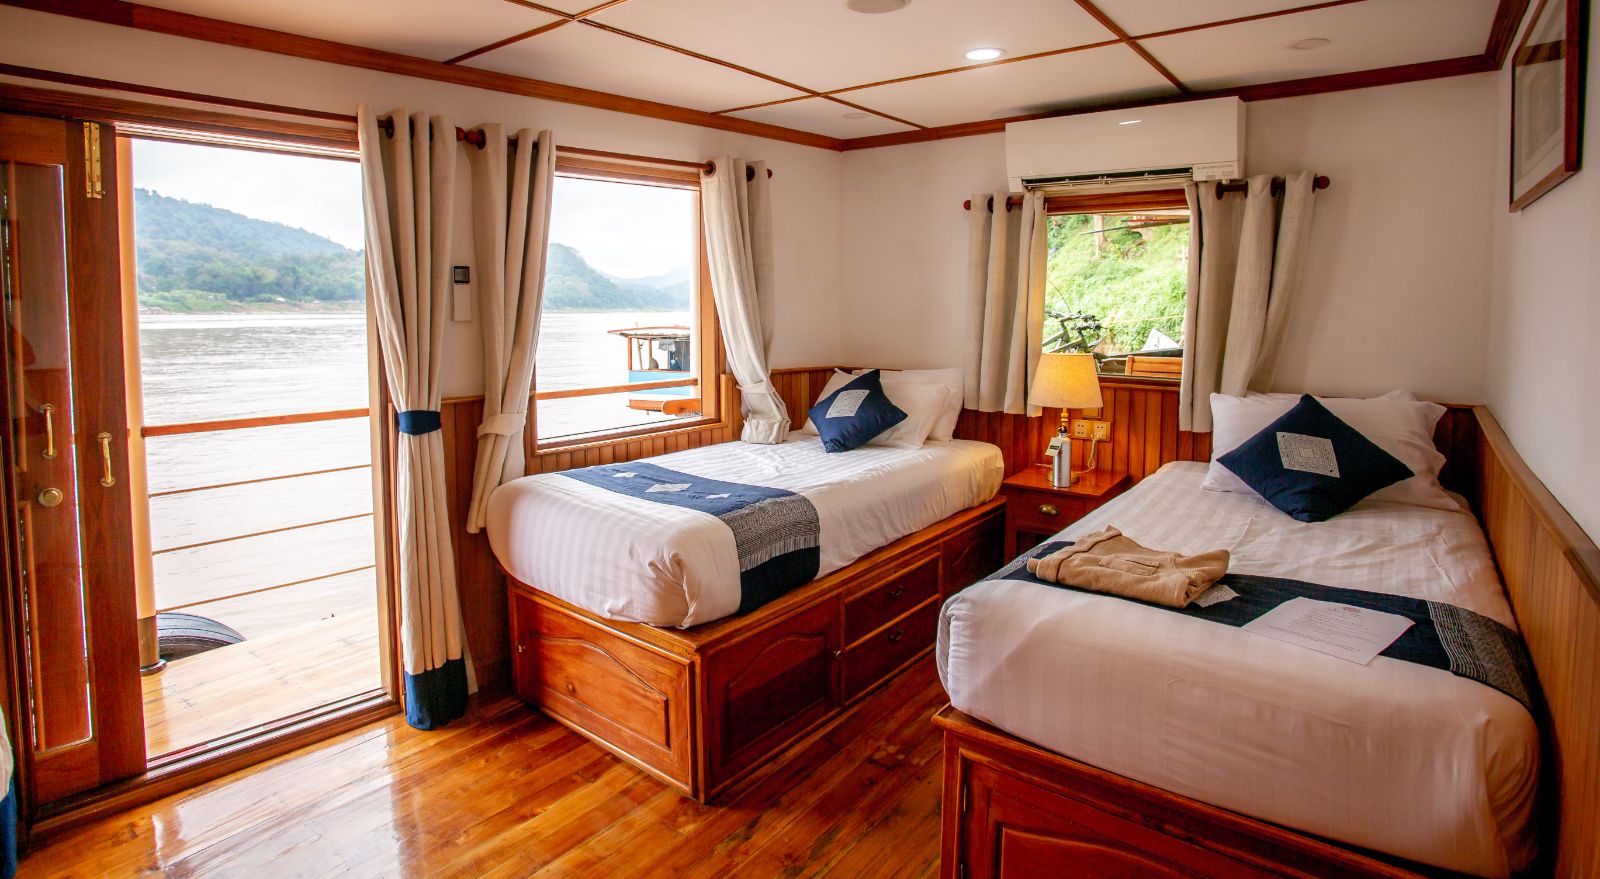 Double cabin onboard the RV Laos Pandaw on the Mekong River in Laos